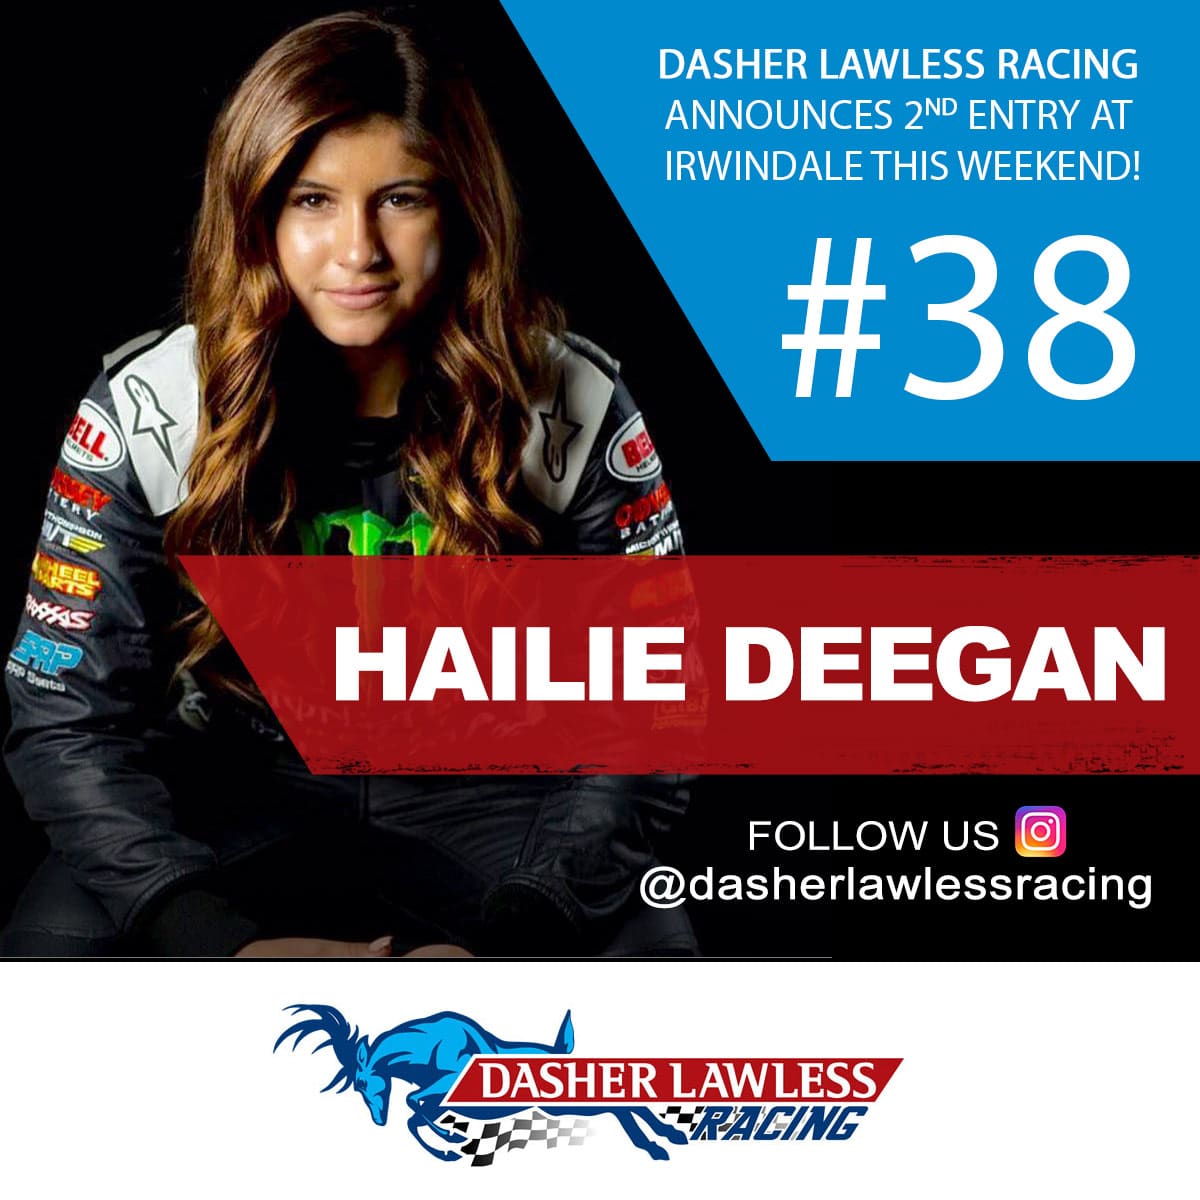 Dasher Lawless Racing showcases a 2nd entry this week with driver Hailie Deegan